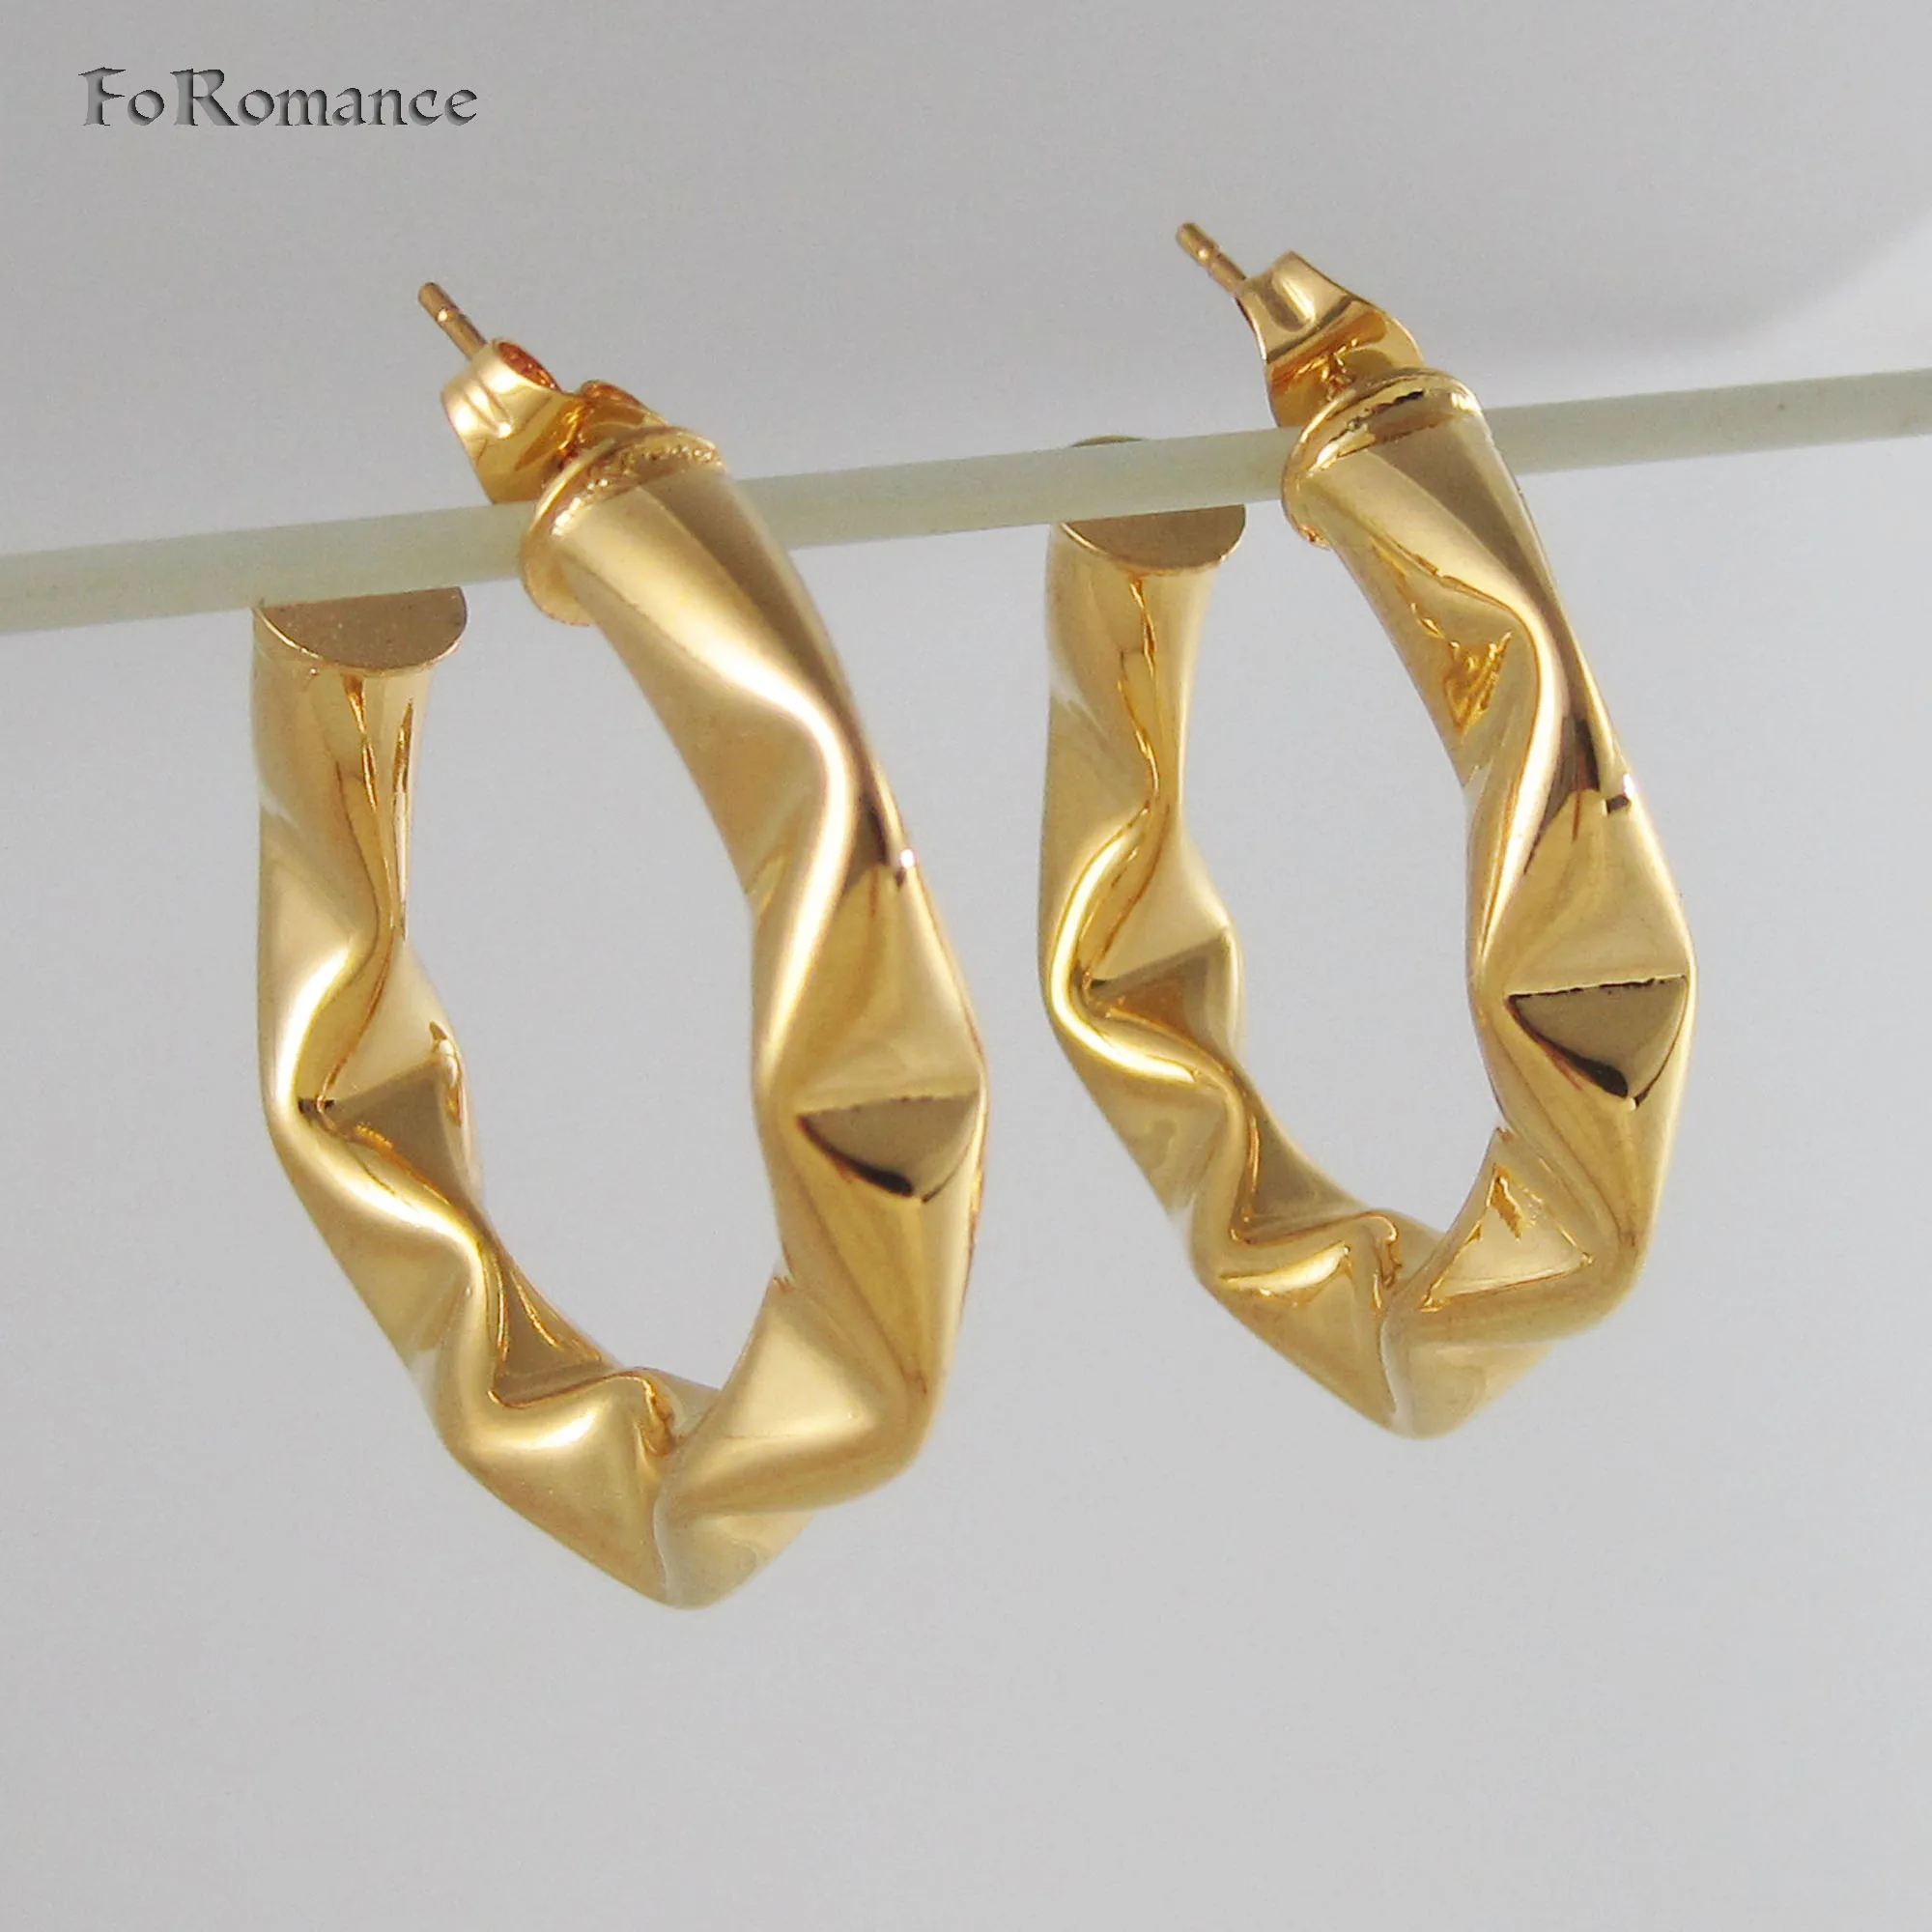 

Foromance NEW TWIST WATER WAVE PLAIN SURFACE HIGH SHIN YELLOW GOLD COLOR ROUND HOOP EARRING DIAMETER 31mm 1.22 INCH